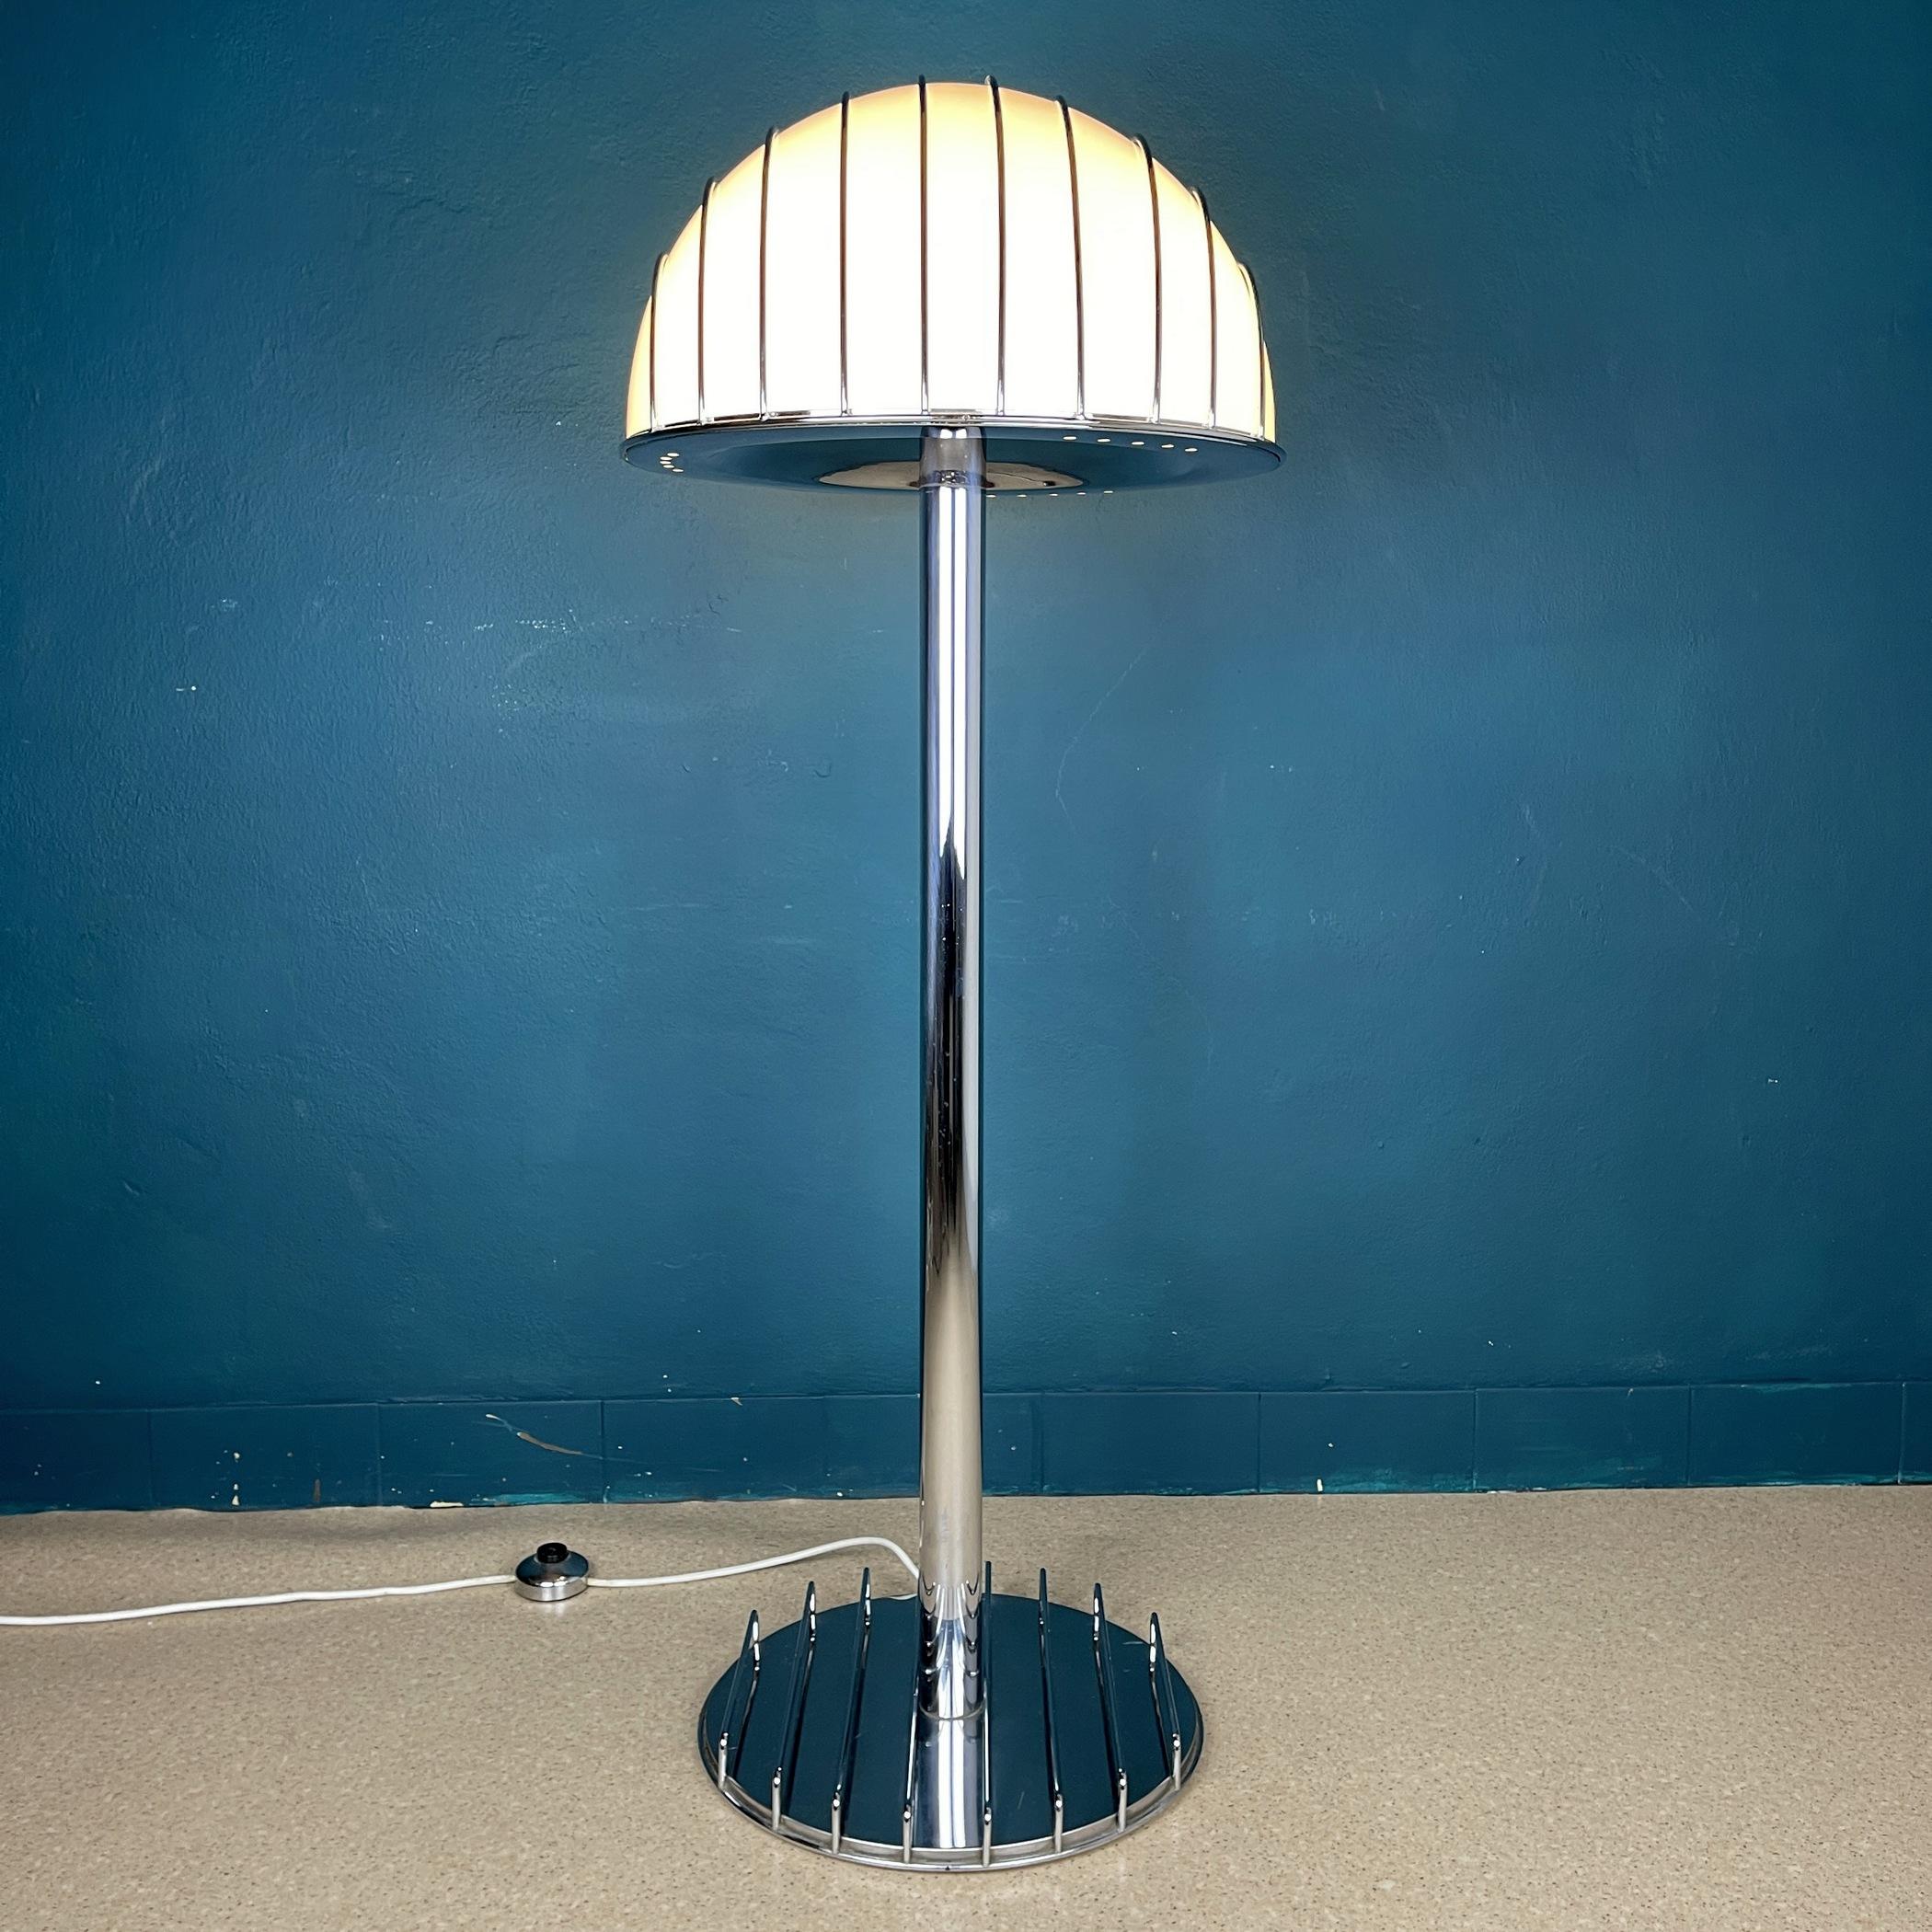 The Mid-Century Modern floor lamp by Adalberto Dal Lago for Esperia was made in Italy in the 1960s. This attractive item is crafted from chromed metal and perspex. The lampshade and base have metal rods around, which gives it a unique look,